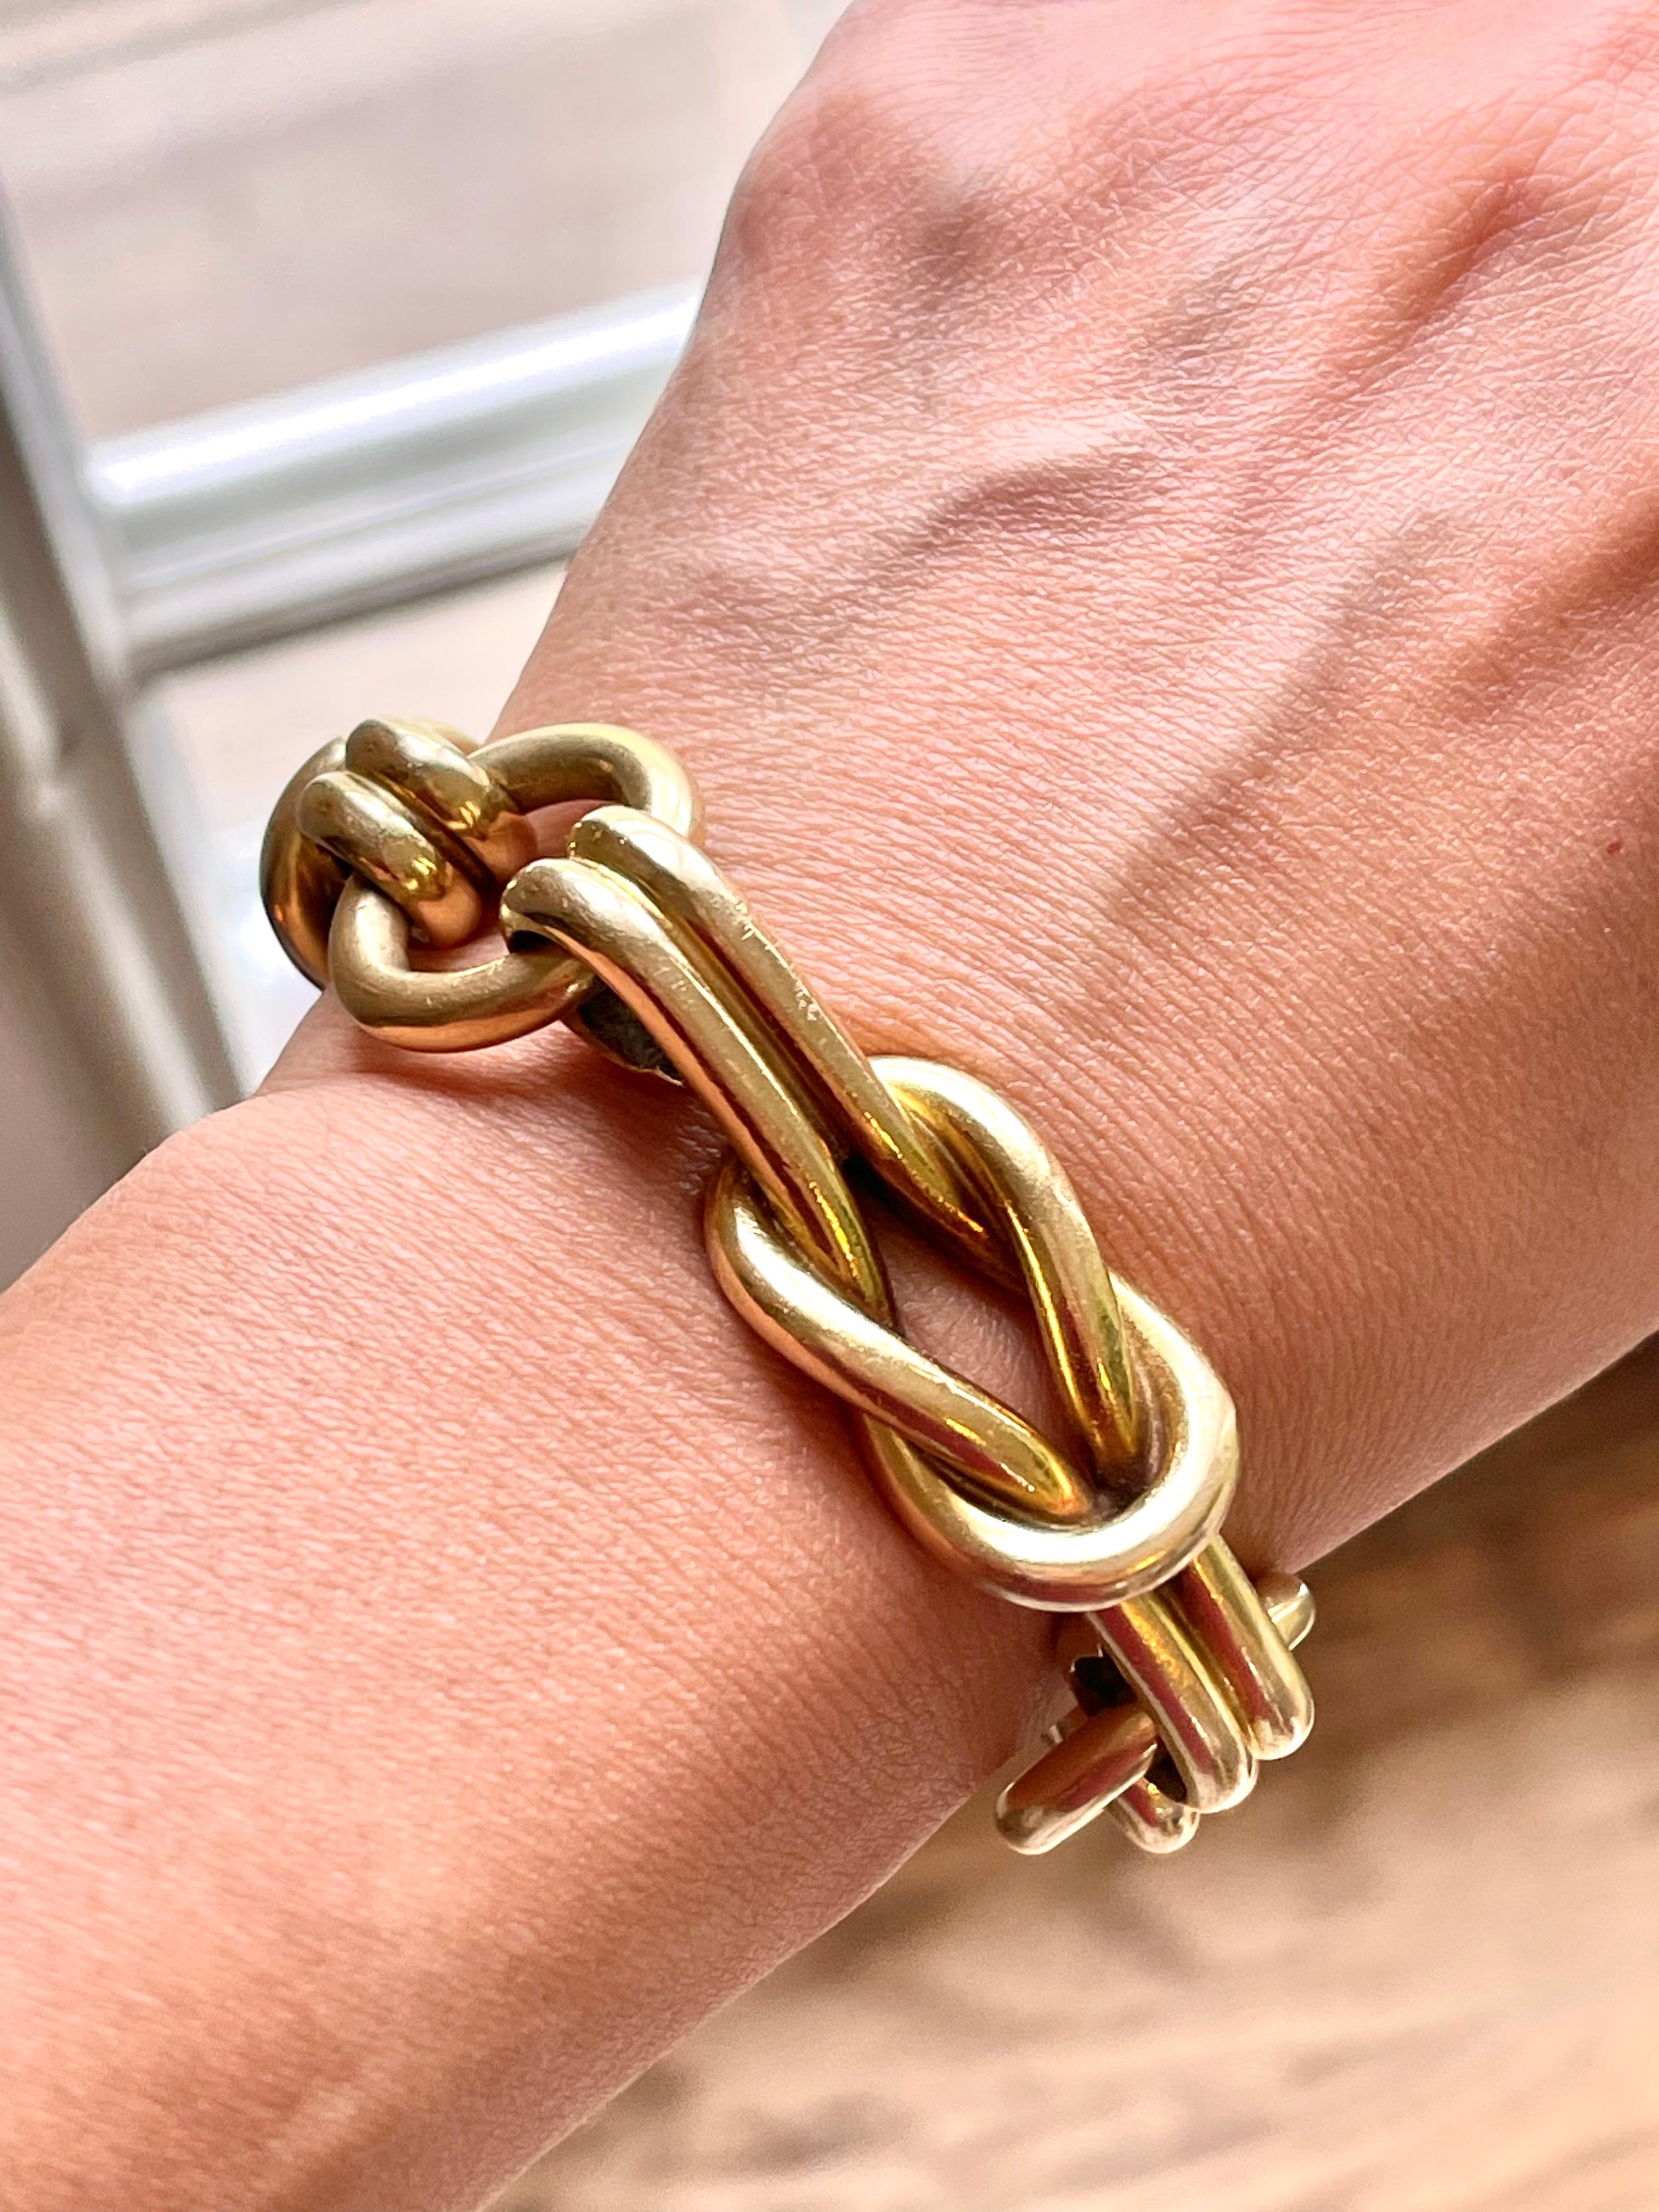 A vintage 18k yellow gold Hercules Knot bracelet by Gucci circa 1980. This gorgeous and heavy bracelet is a hollow form gold work of art. It depicts a Hercules Knot made of two ropes that symbolizes the strength of love and marriage. The knot was